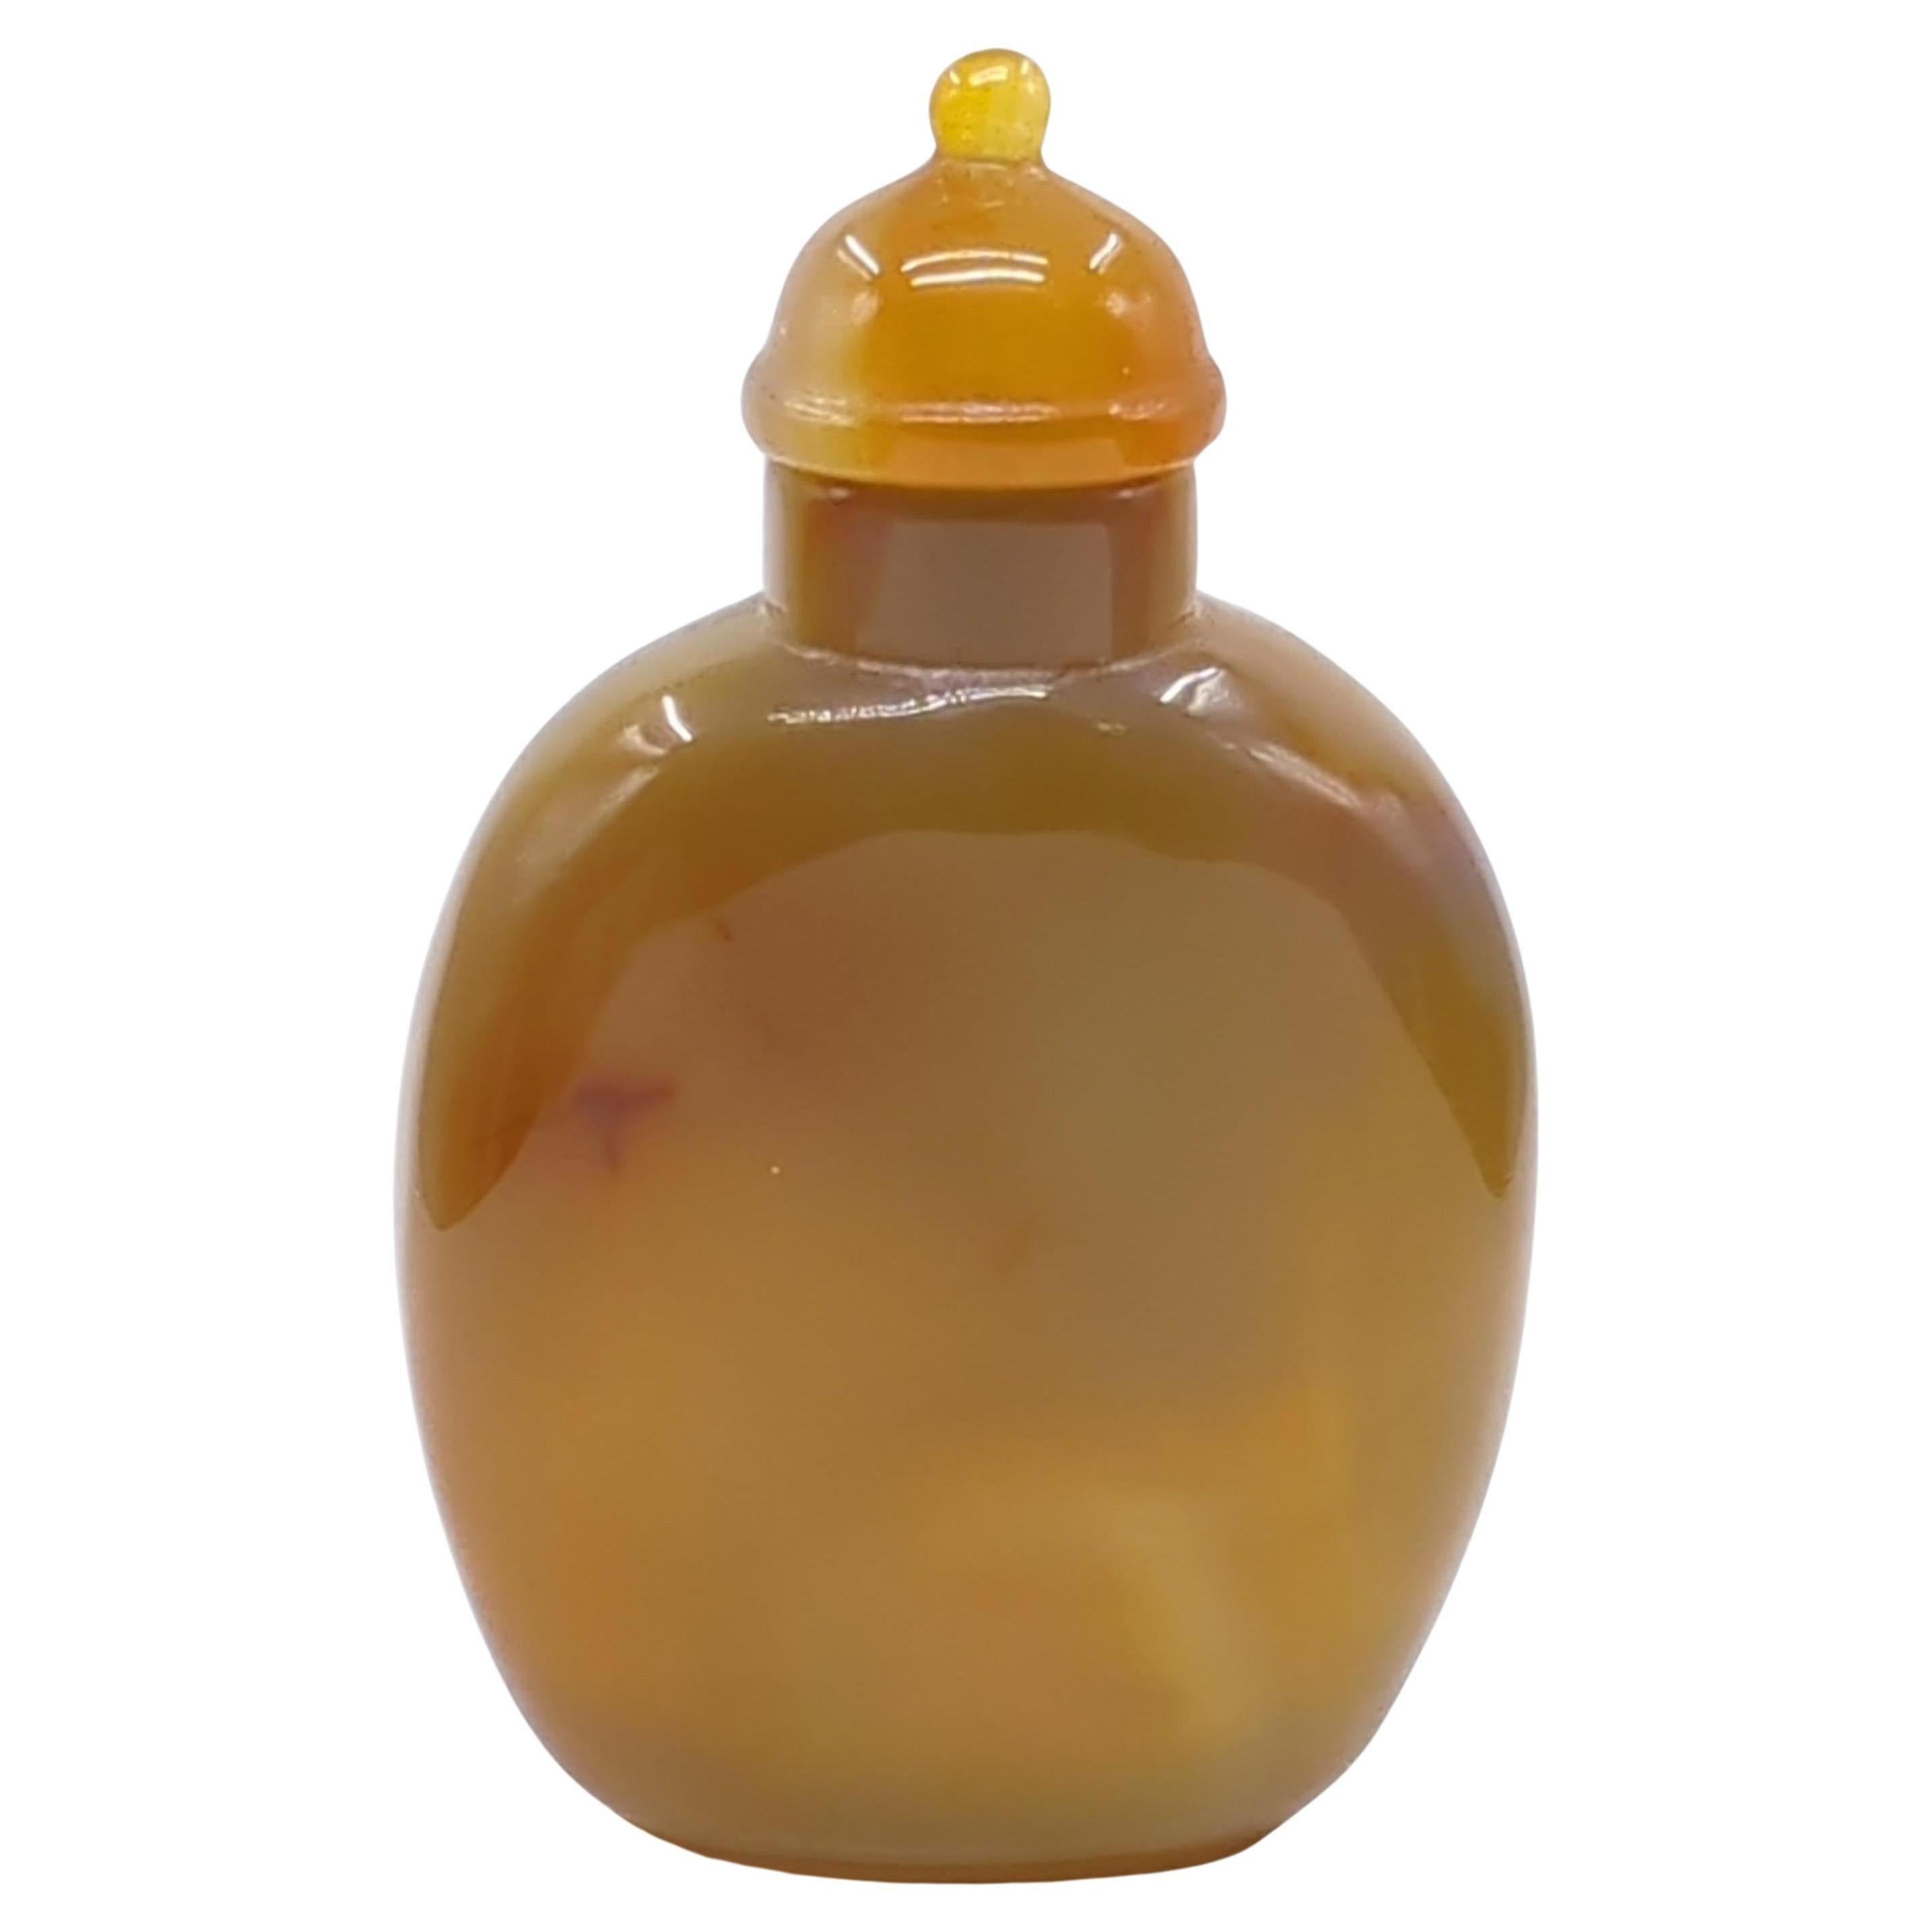 A Chinese late Qing dynasty shadow agate snuff bottle, exquisitely carved to depict a scene of contemplative serenity. It features a scholar, thoughtfully seated on a rock, positioned beneath the overhanging boughs of a pine tree. The natural